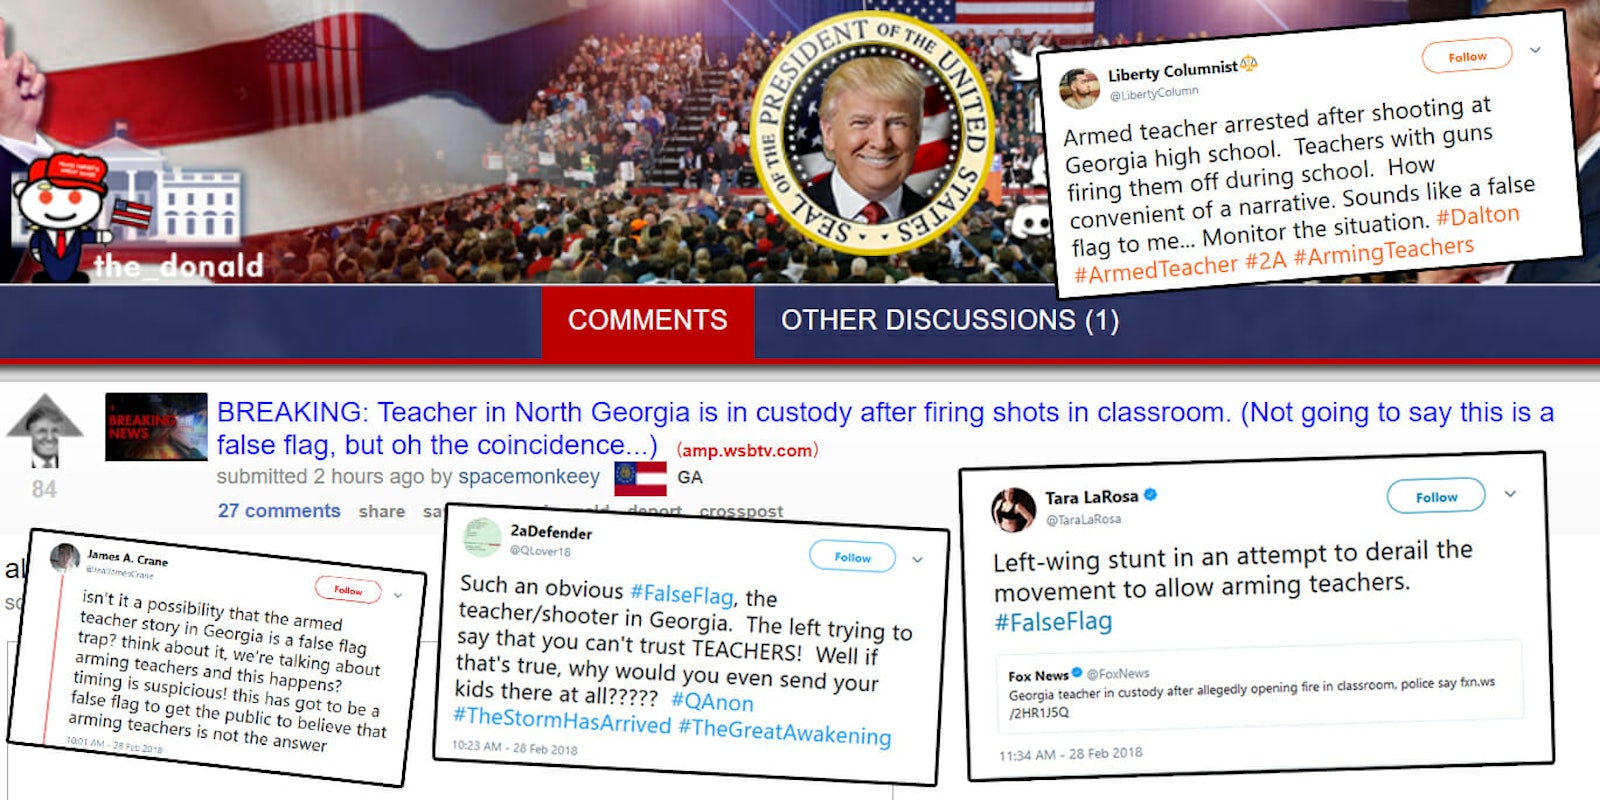 A teacher in Georgia was arrested on Wednesday after reports of shots being fired at a school. People on Twitter are already calling it a 'false flag,' in light of Trump's suggestion to arm teachers in the wake of the Parkland shooting.